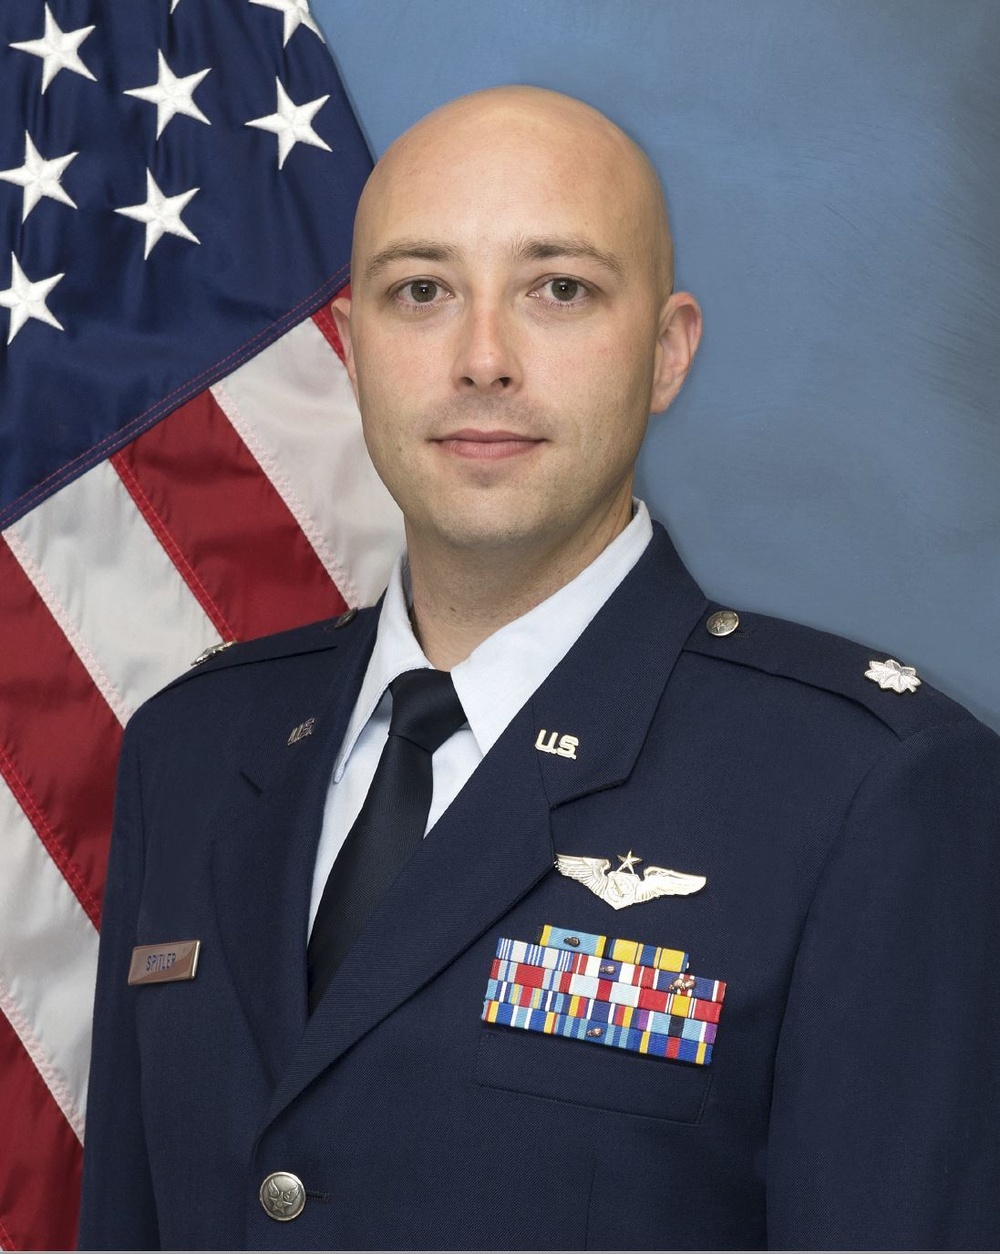 Lieutenant Colonel David Spitler became commander of the 805th Combat Training Squadron (CTS), also known as the Shadow Operations Center-Nellis (ShOC-N)